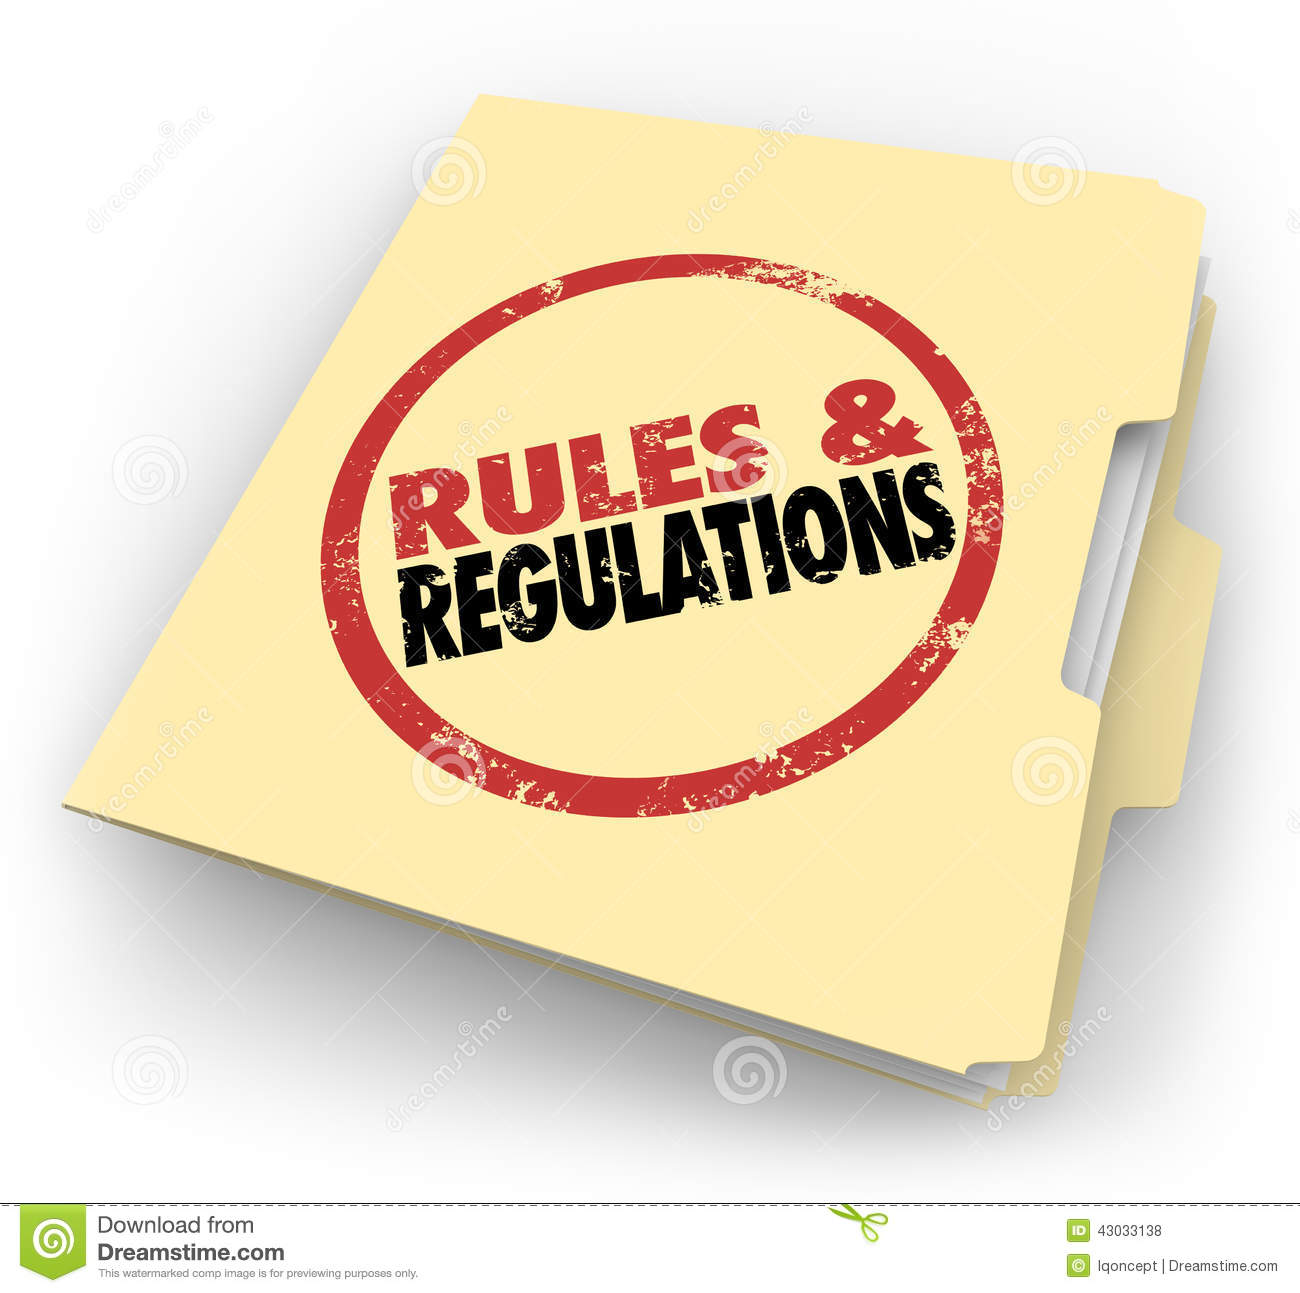 Rules And Regulations Stamped On A Manila Folder Of Documents Or Files